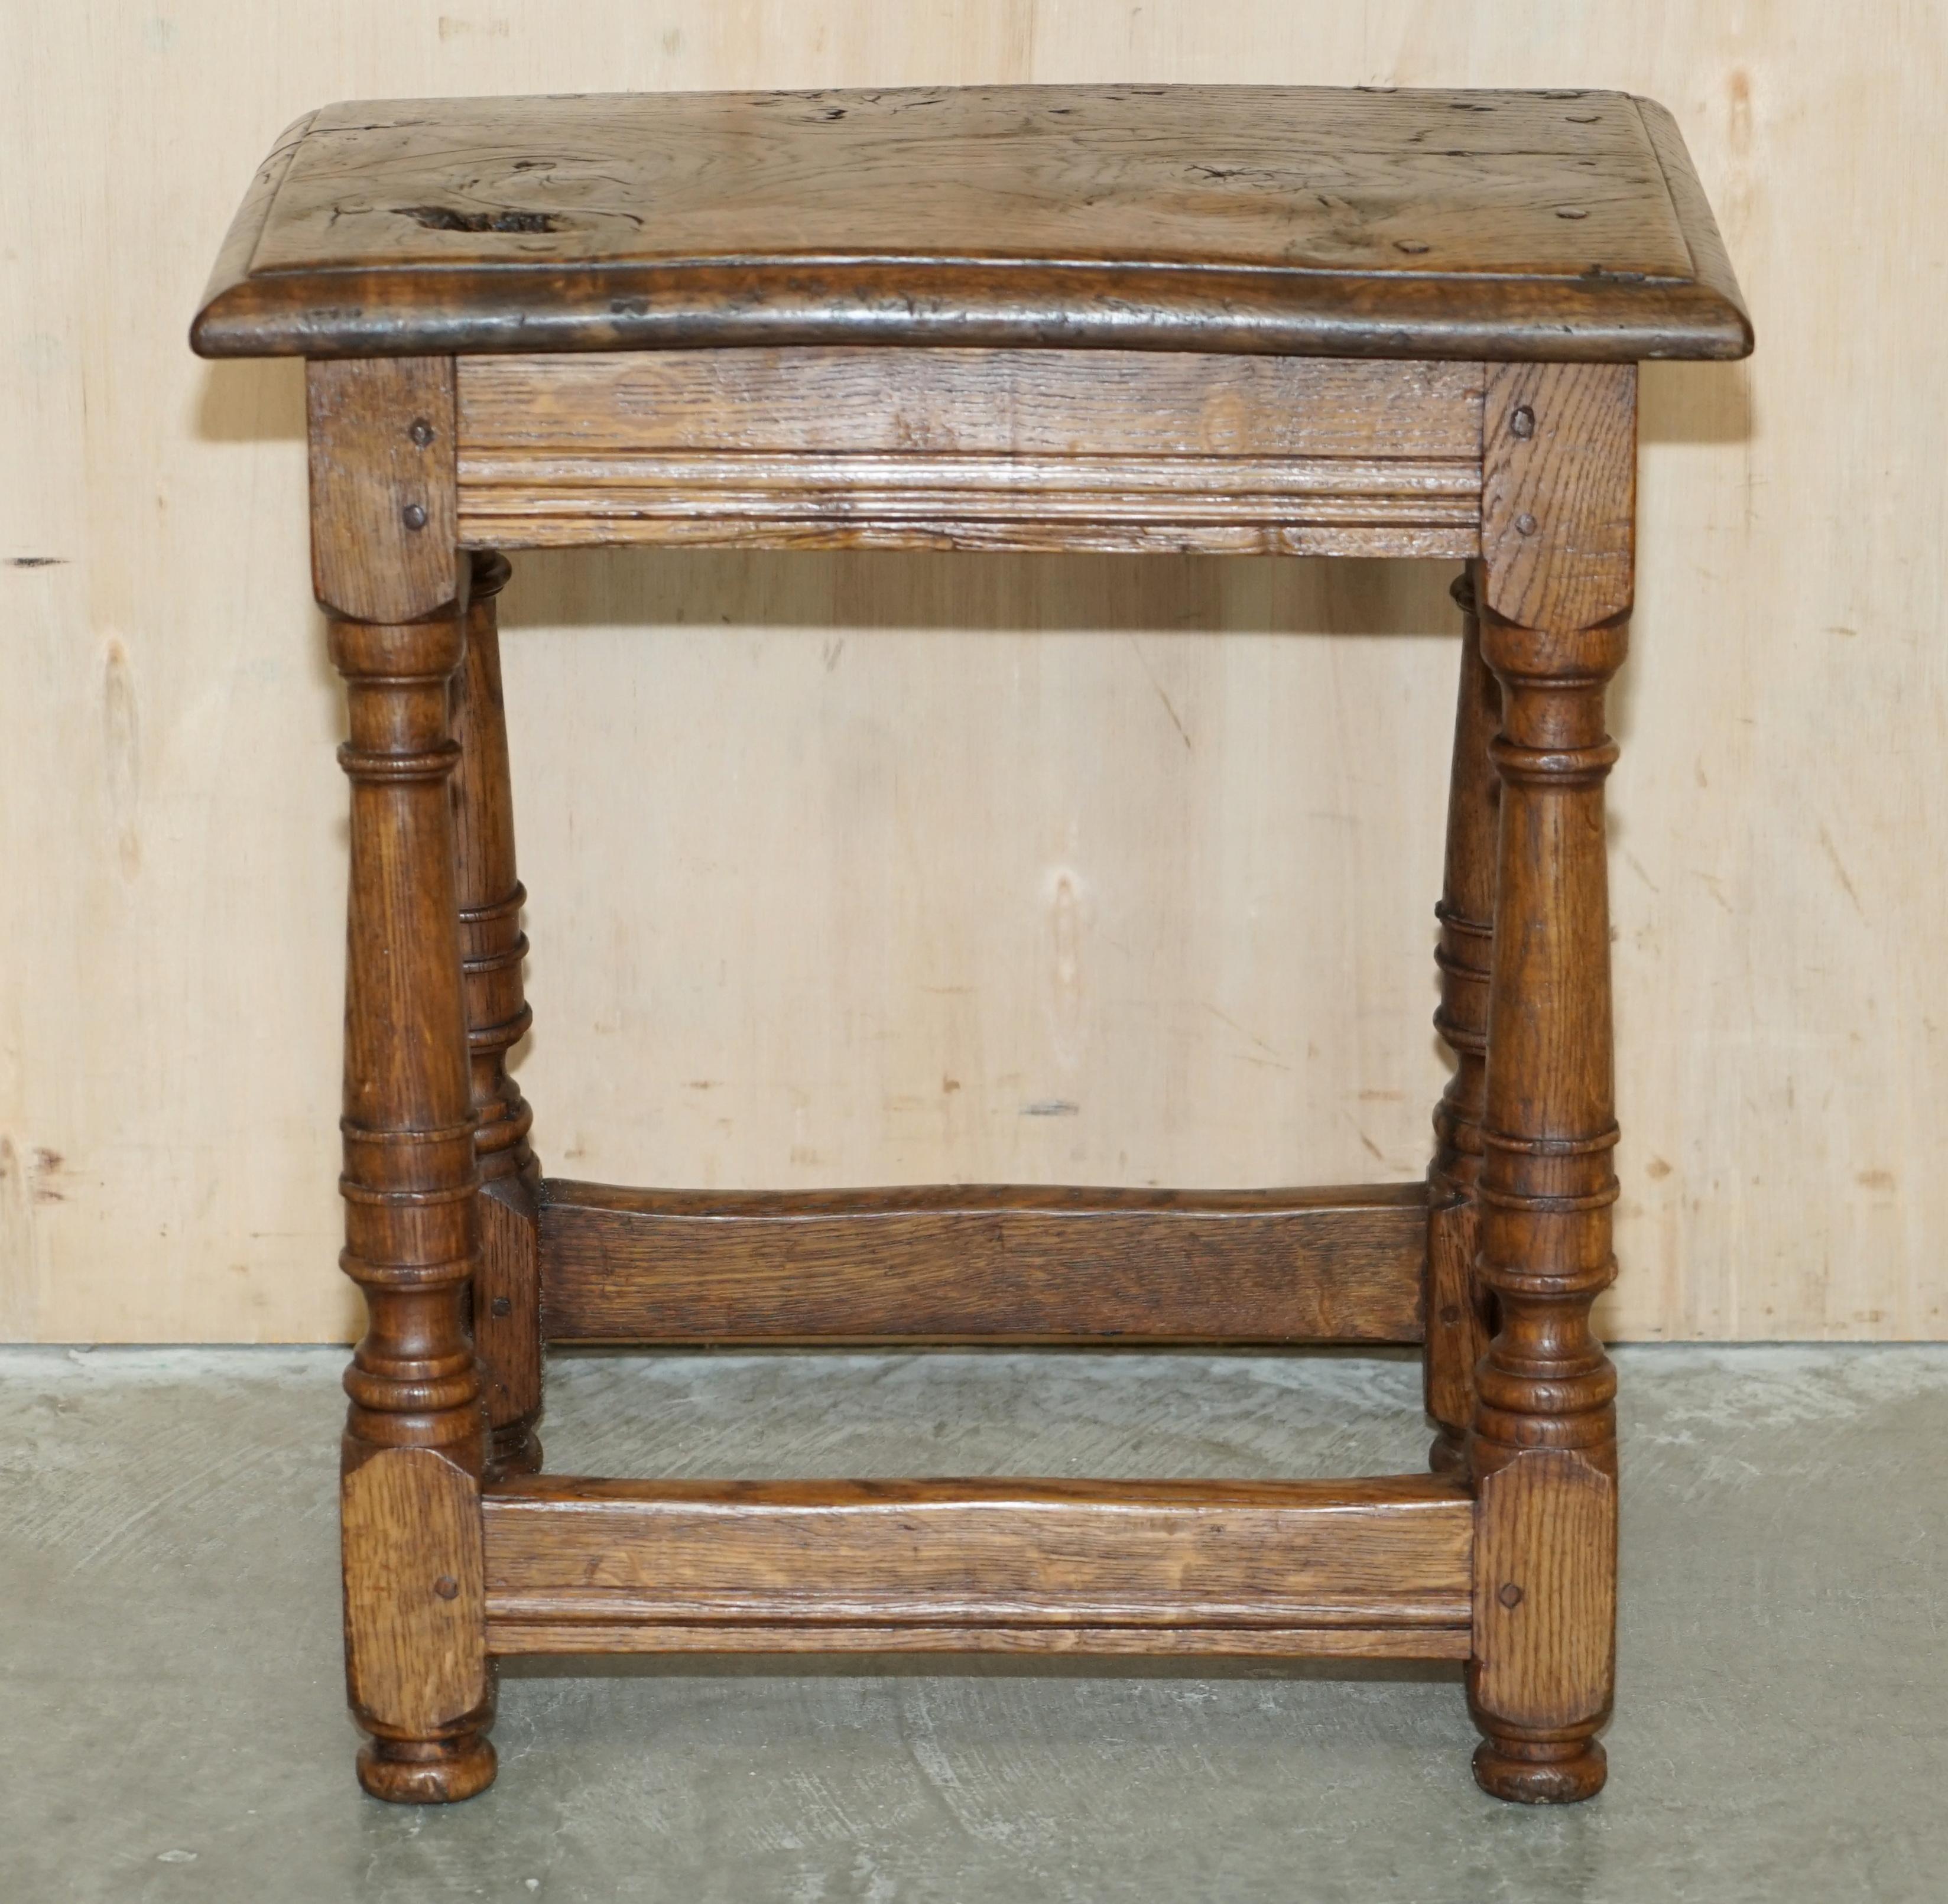 George III STUNNiNG HEAVILY BURRED OAK ANTIQUE 18TH CENTURY CIRCA 1780 JOINTED STOOL TABLE For Sale